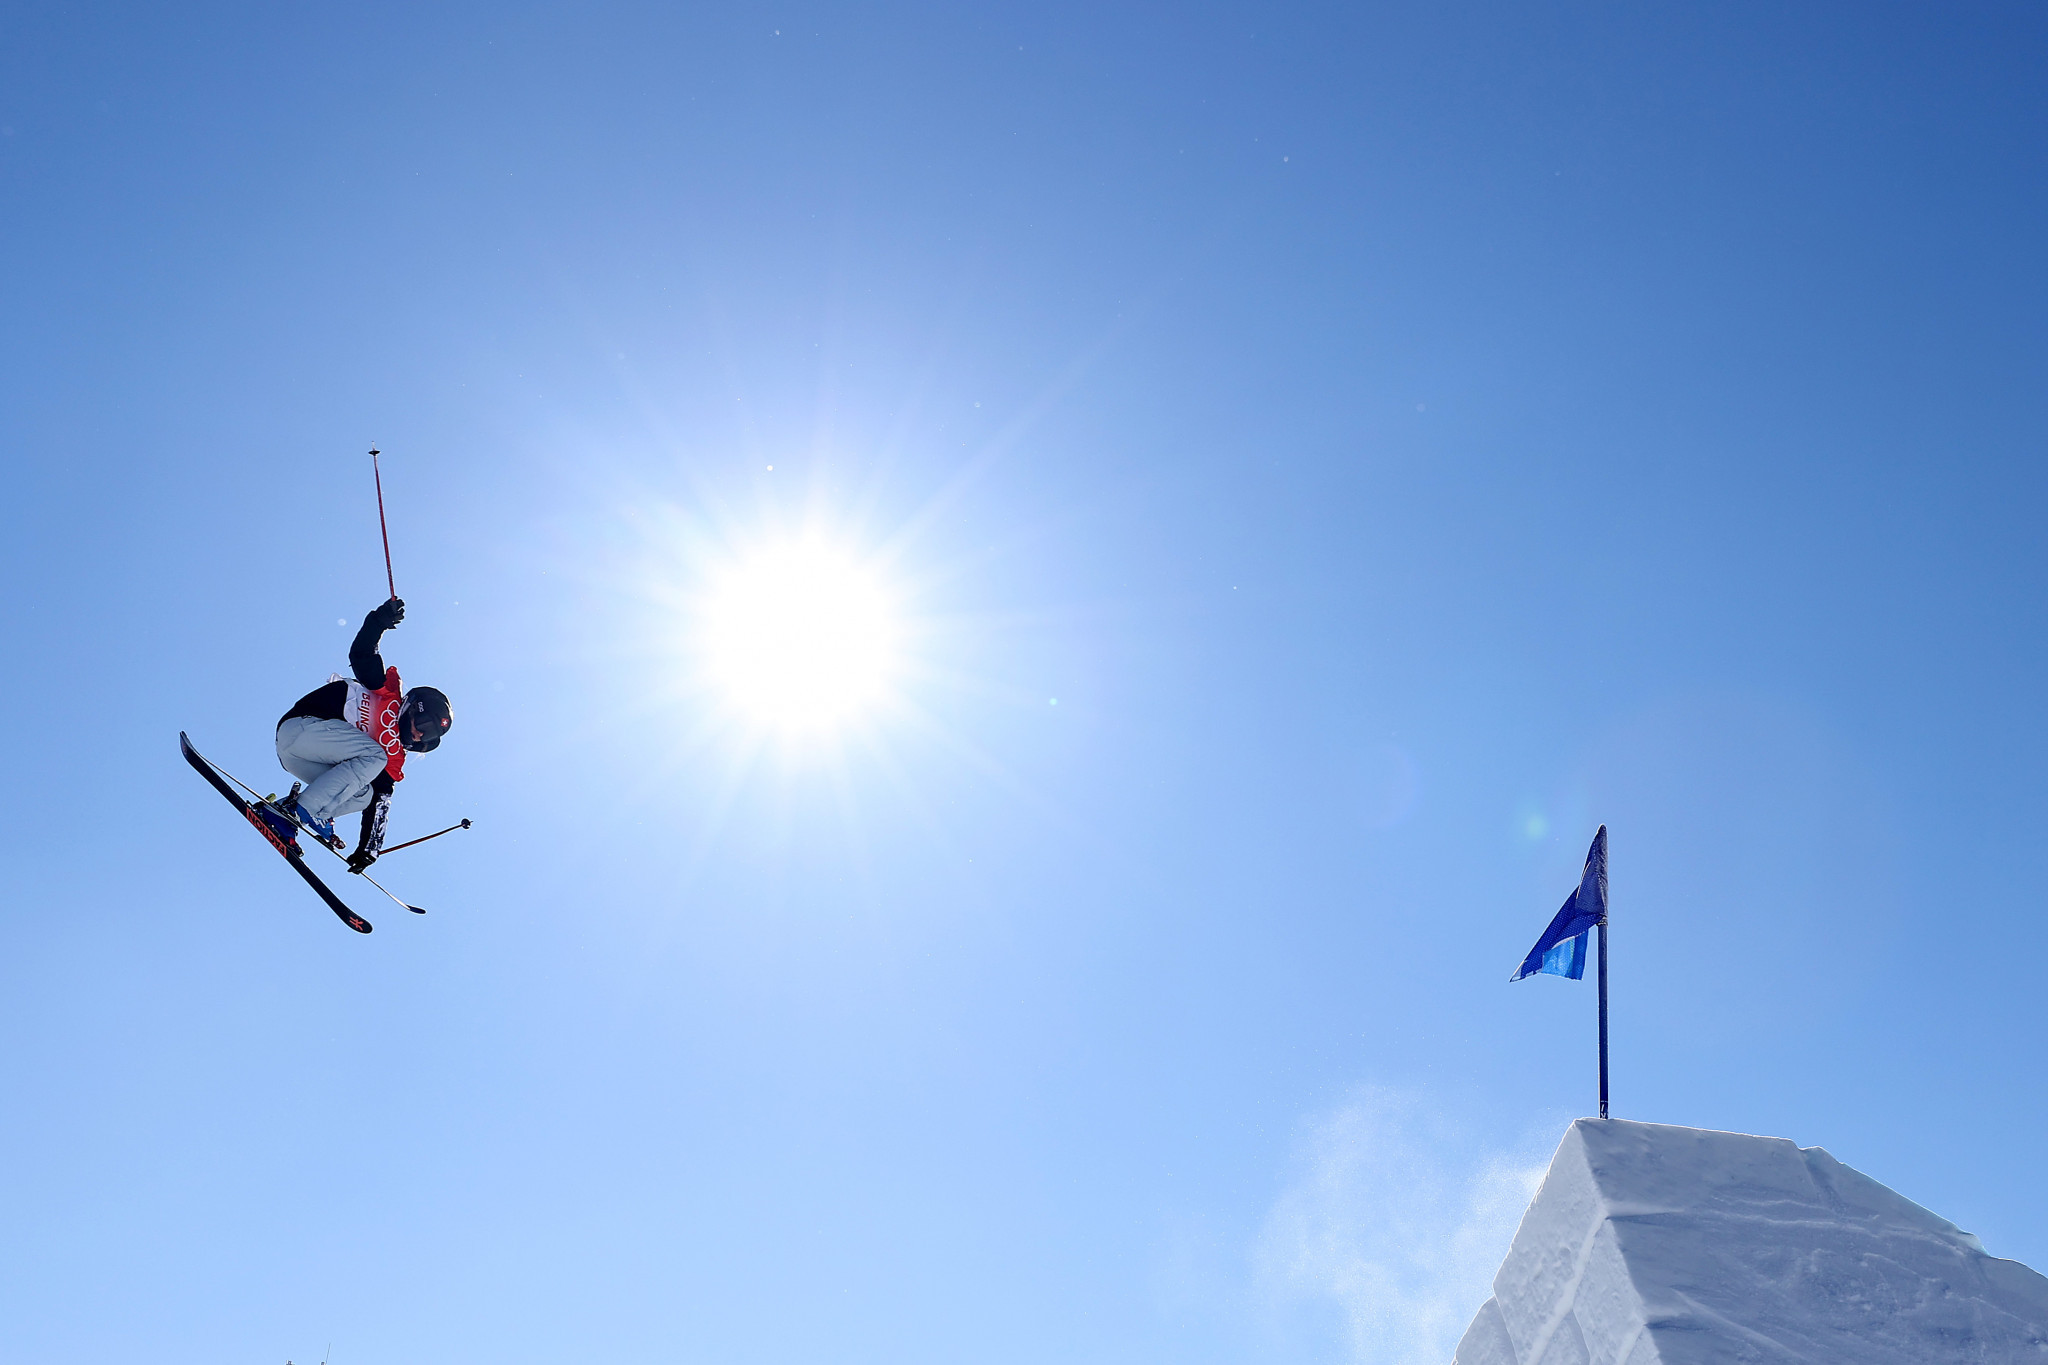 Weather impacts Slopestyle World Cup schedule again in Bakuriani